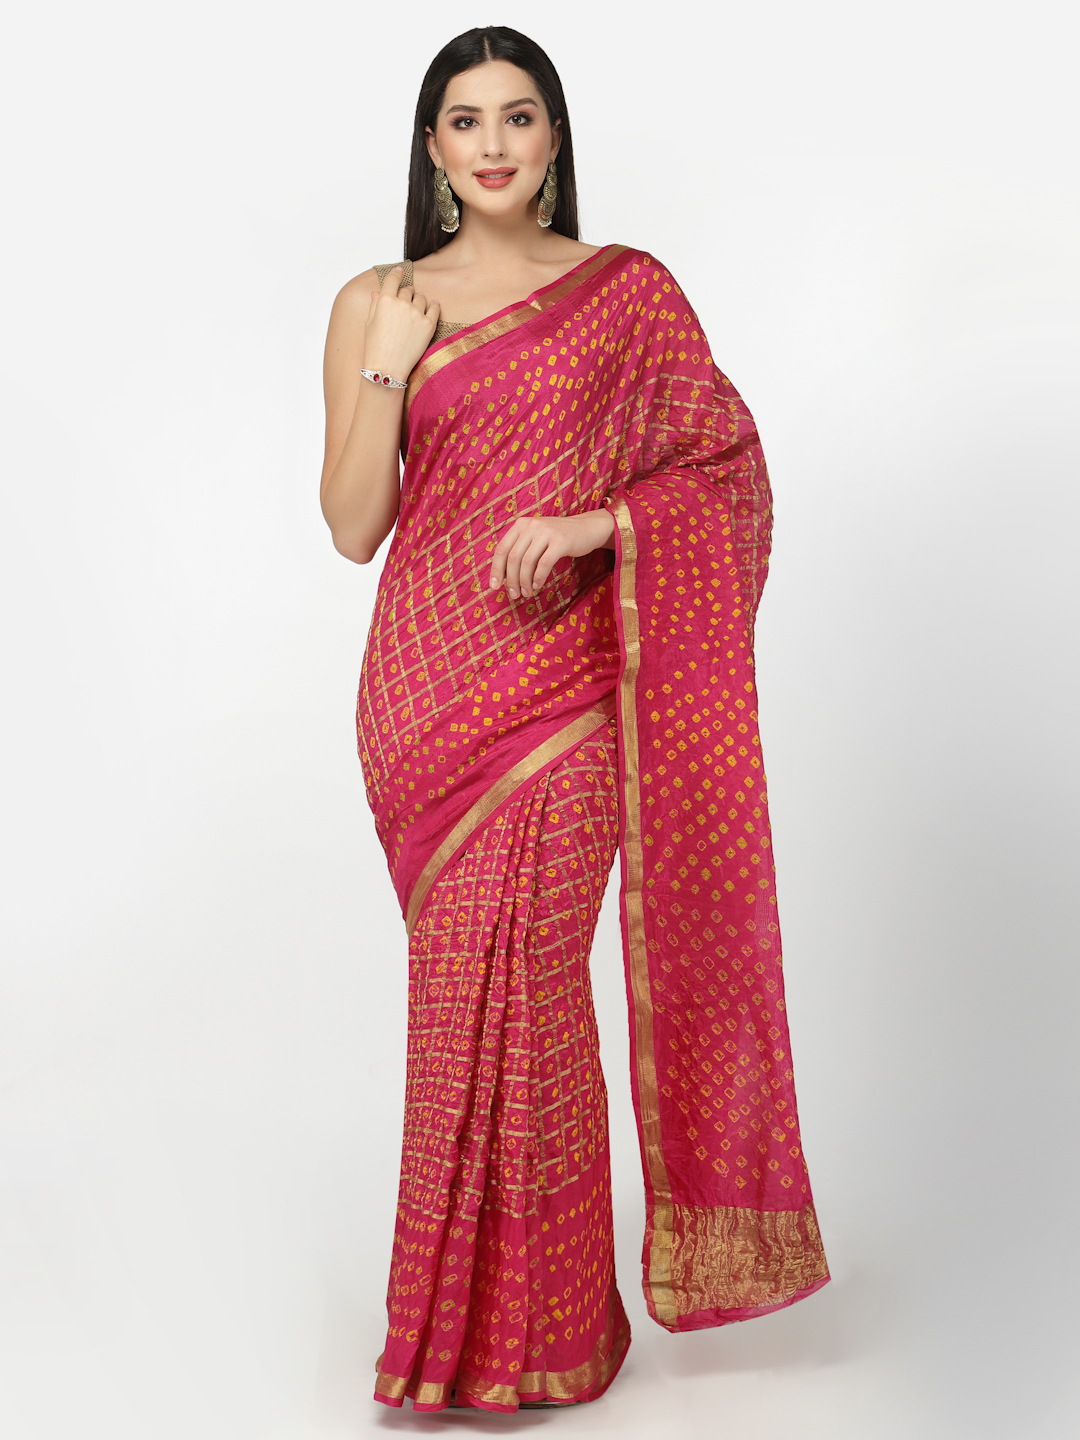 Women Silk Bandhani and Zari Weaving Saree with Unstitched Blouse - Pink